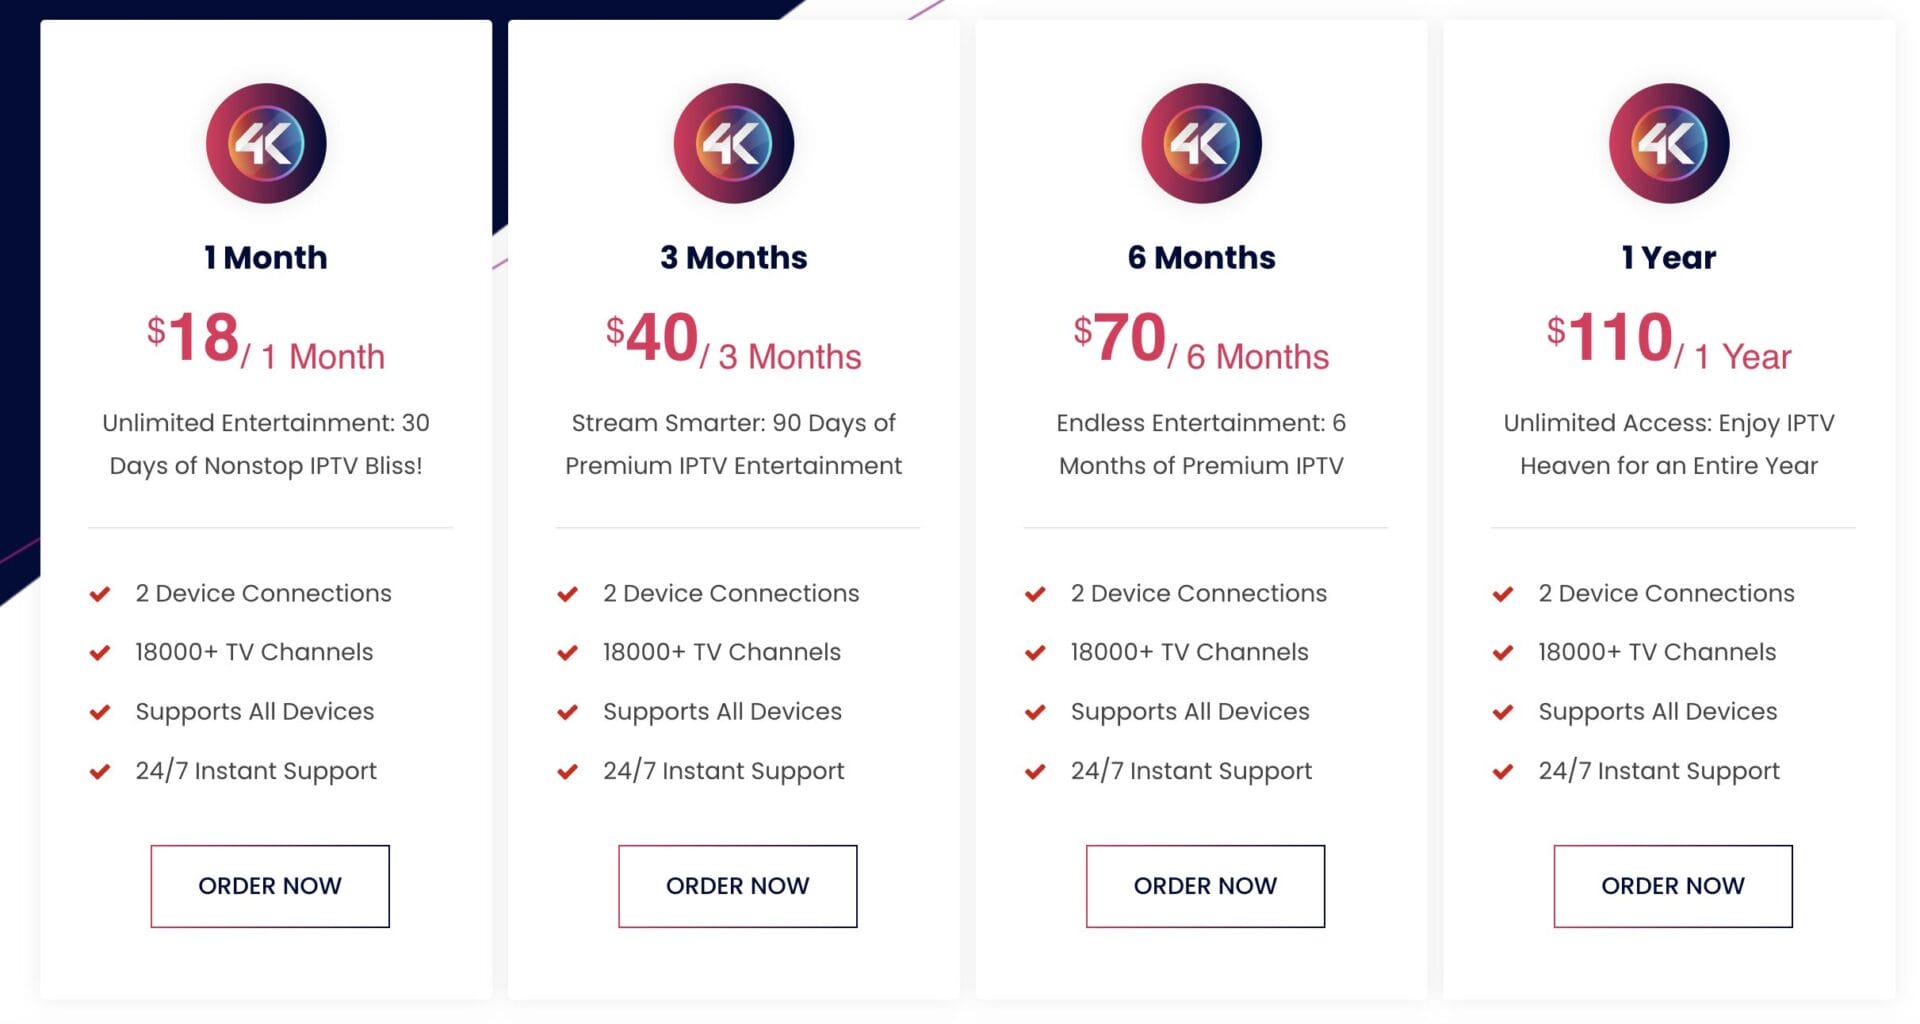 Pricing for Two Connection Plans